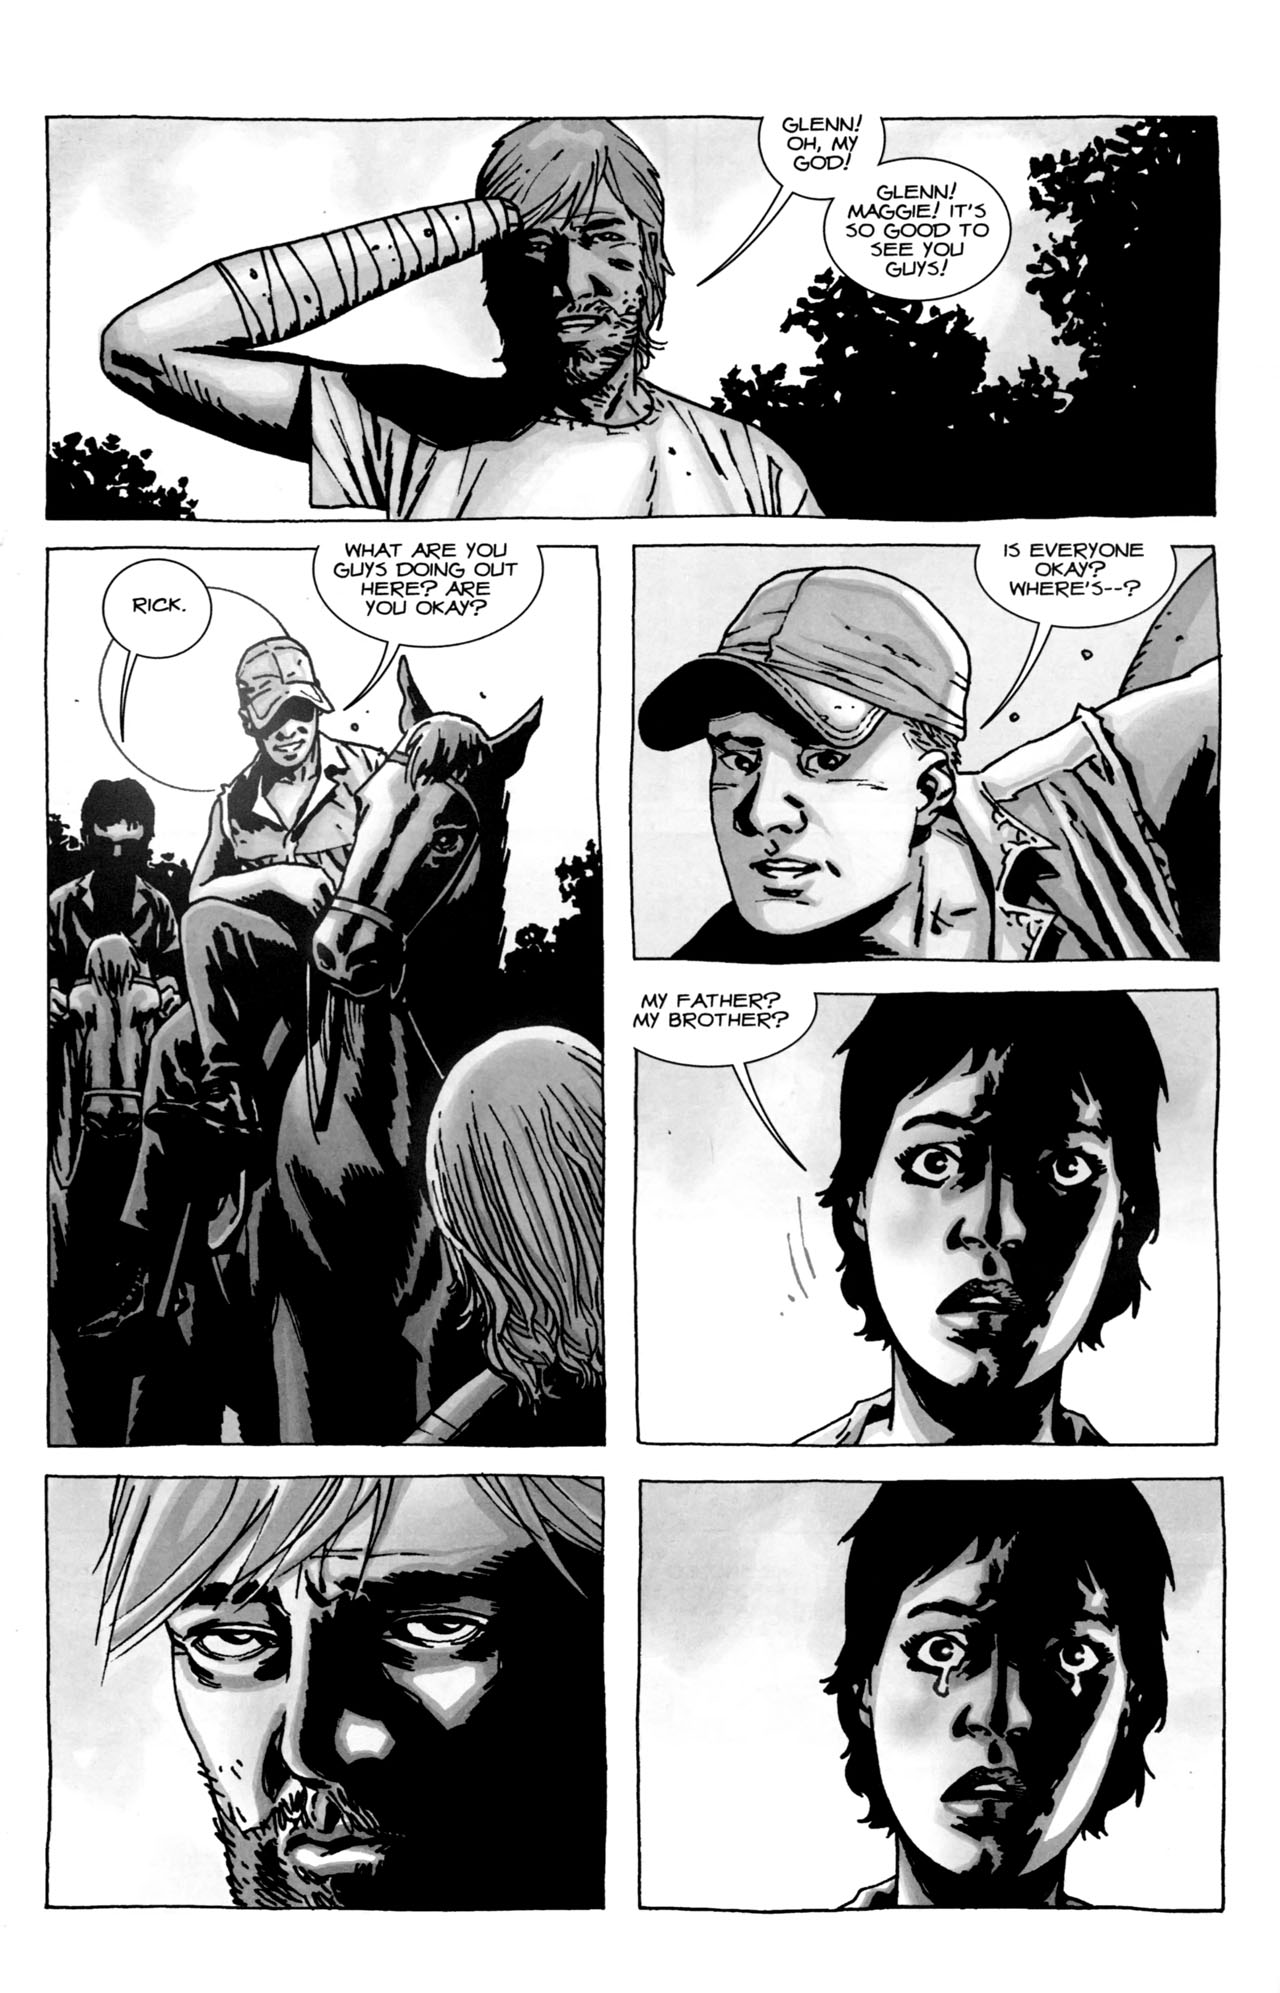 cartoon - Glenn! Oh, My God! Glenn! Maggie! It'S So Good To See You Guys! What Are You Guys Doing Out Here? Are You Okay? Is Everyone Okay? Where'S? Rick. My Father? My Brother?